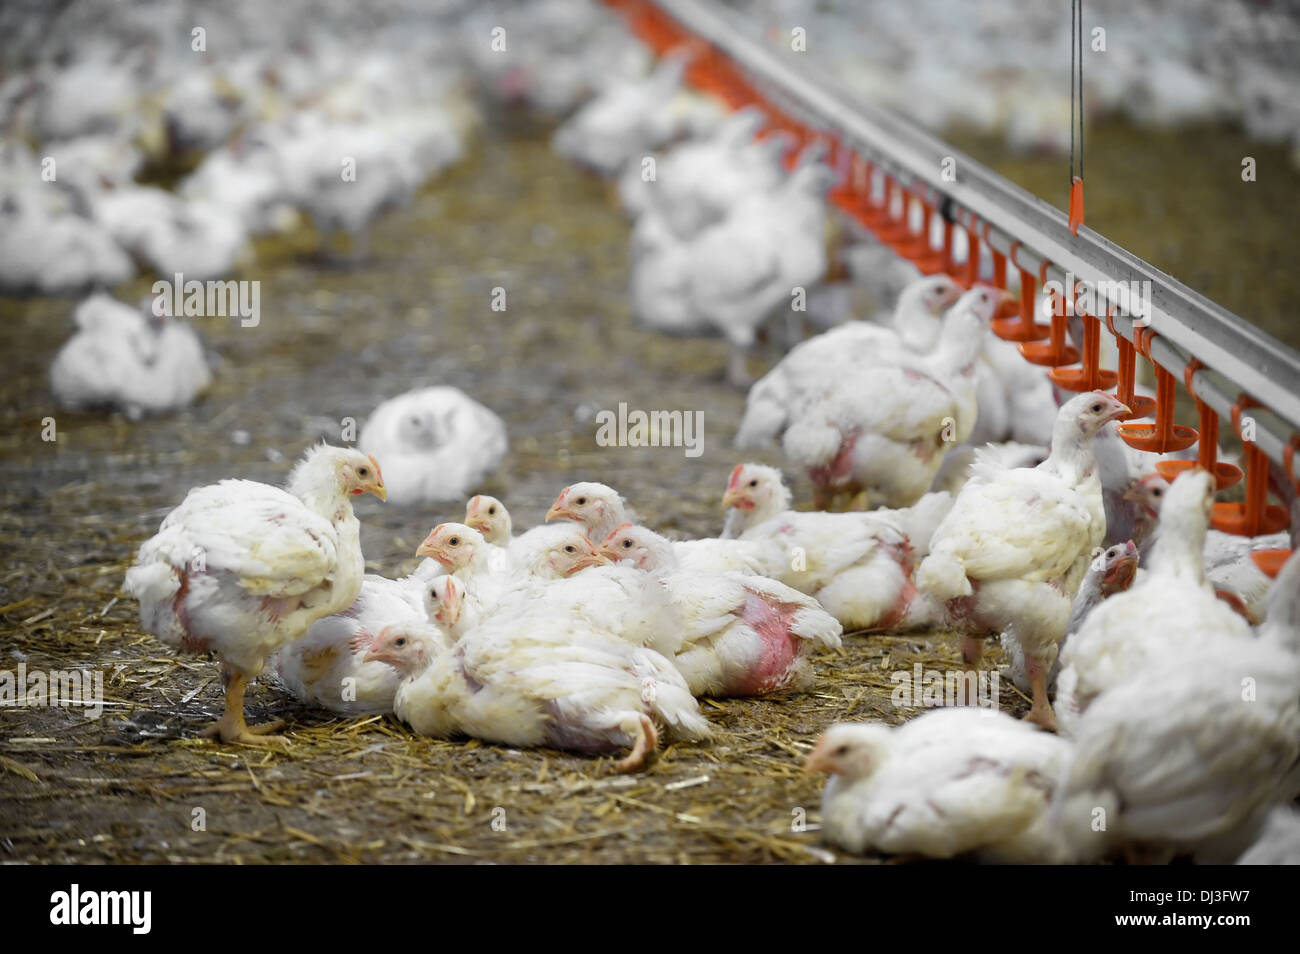 Several poultry laying on the ground inside a poultry farm Stock Photo